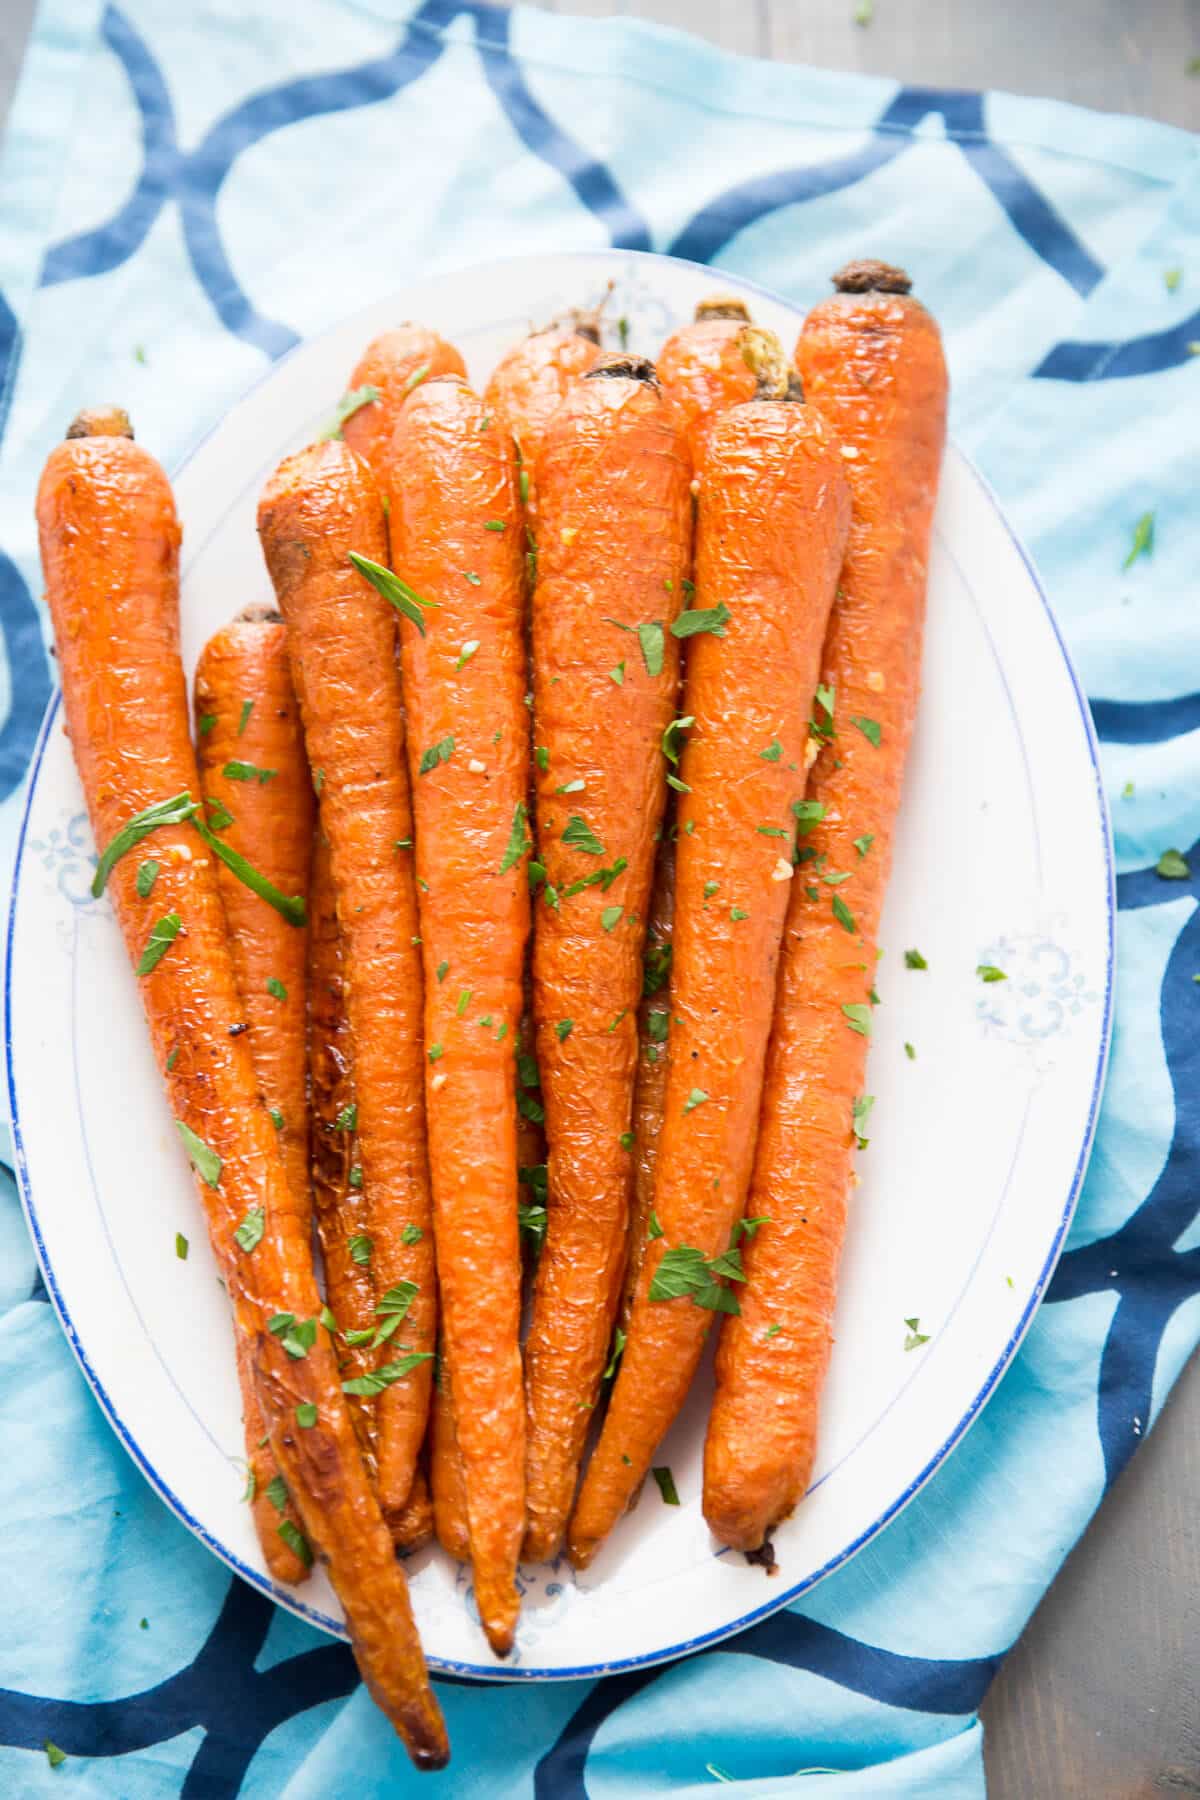 Oven roasted carrots are such a simple side dish! The bake up soft, tender and so delicious!